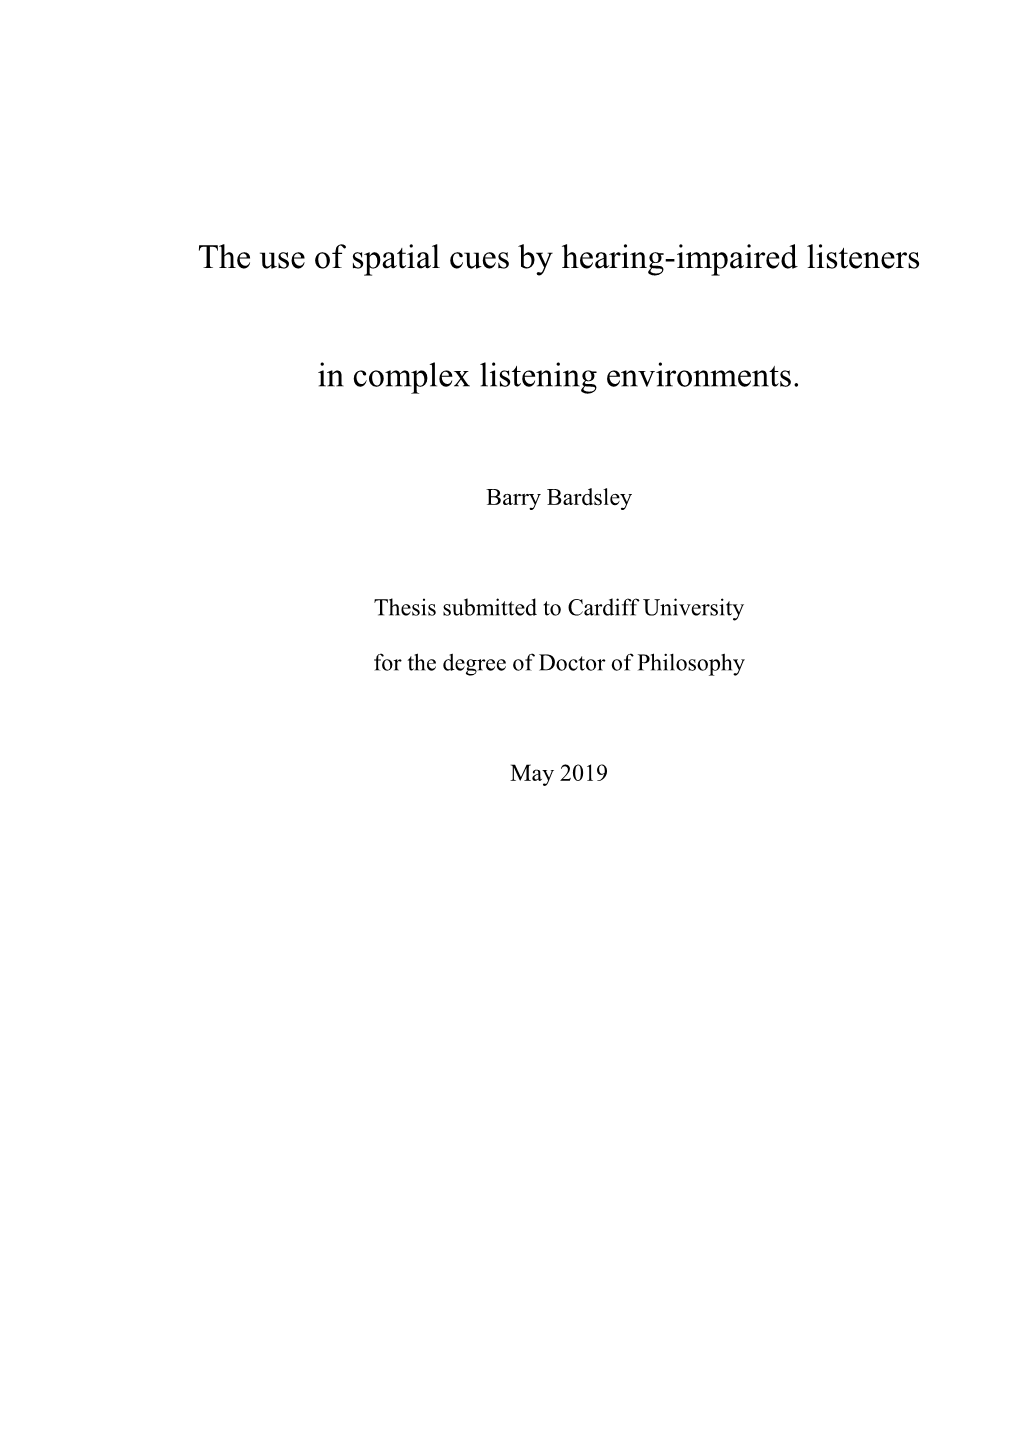 The Use of Spatial Cues by Hearing-Impaired Listeners In